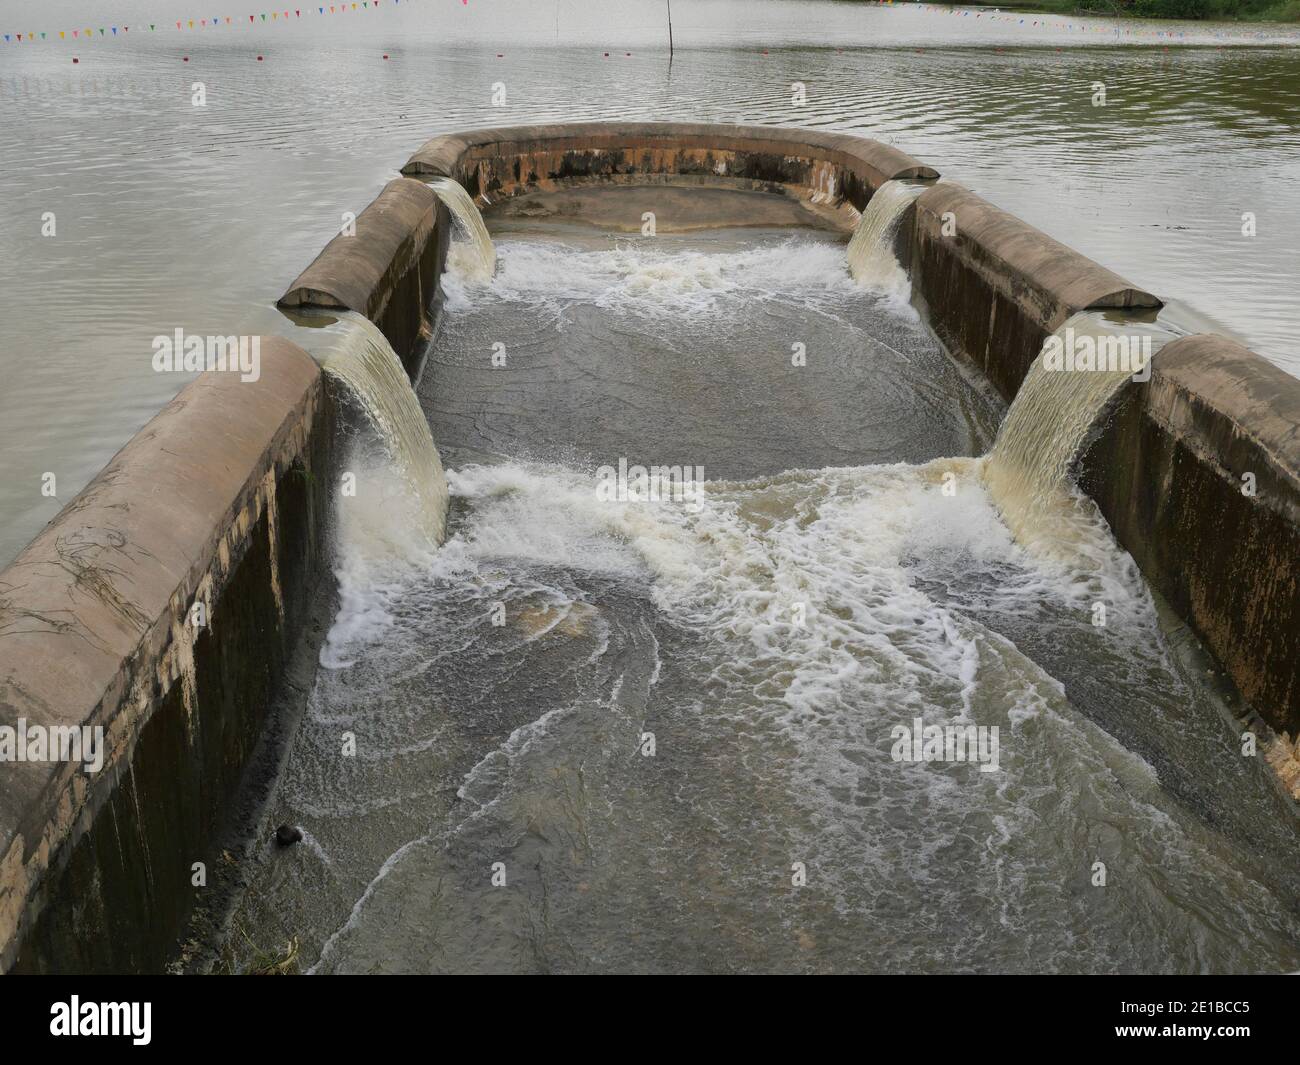 Turbid water in the dam overflows into the spillway, Irrigation during the rainy season, Thailand Stock Photo